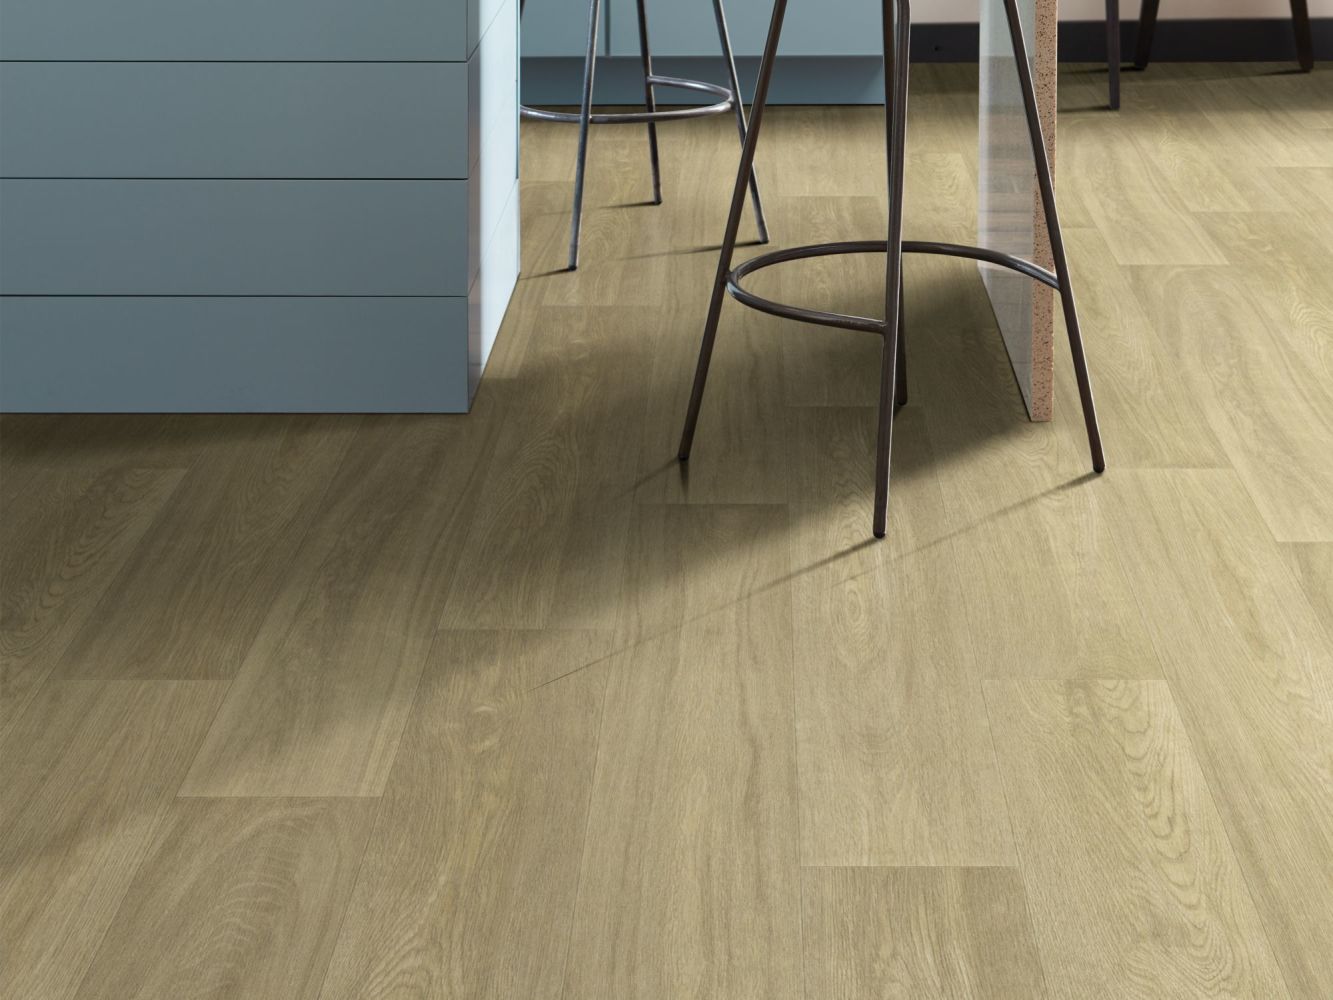 Shaw Floors Resilient Residential Natural Luxe  55g Mount Vernon 00232_VG089